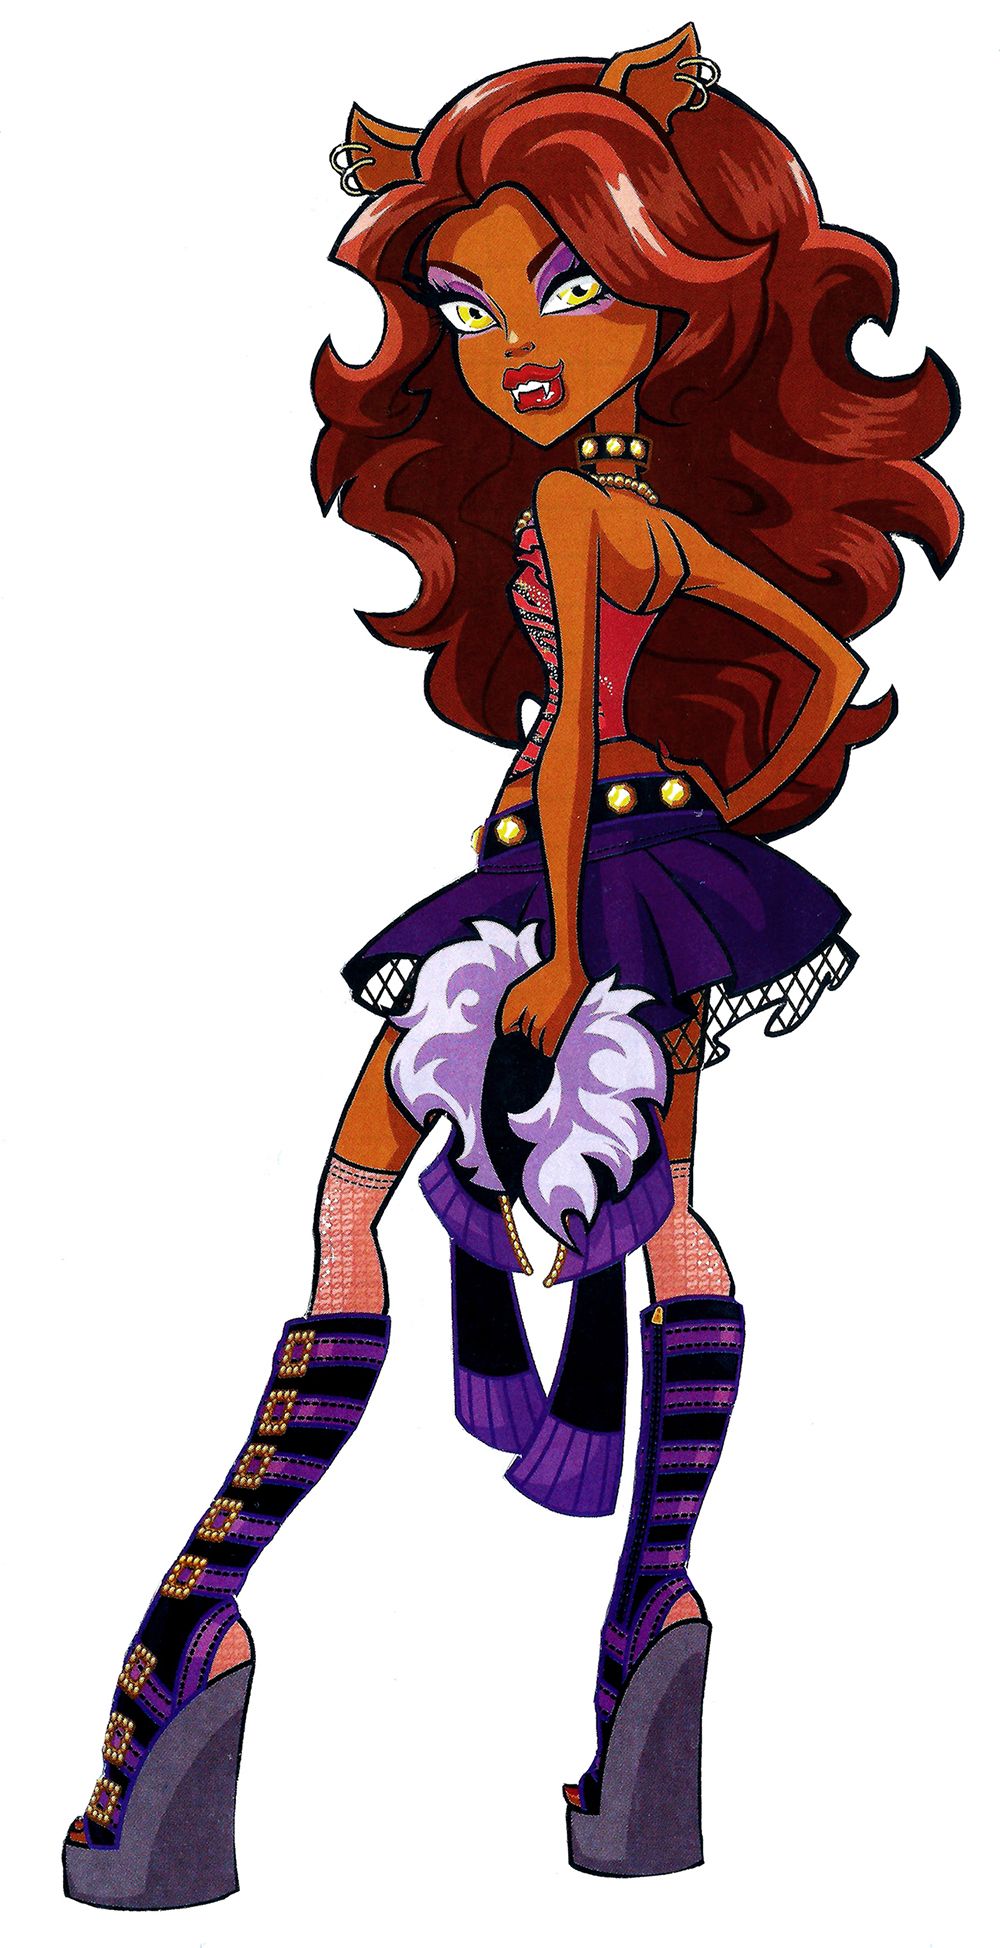 Clawdeen Wolf. Basic. Monster high characters, Monster high art, Monster high